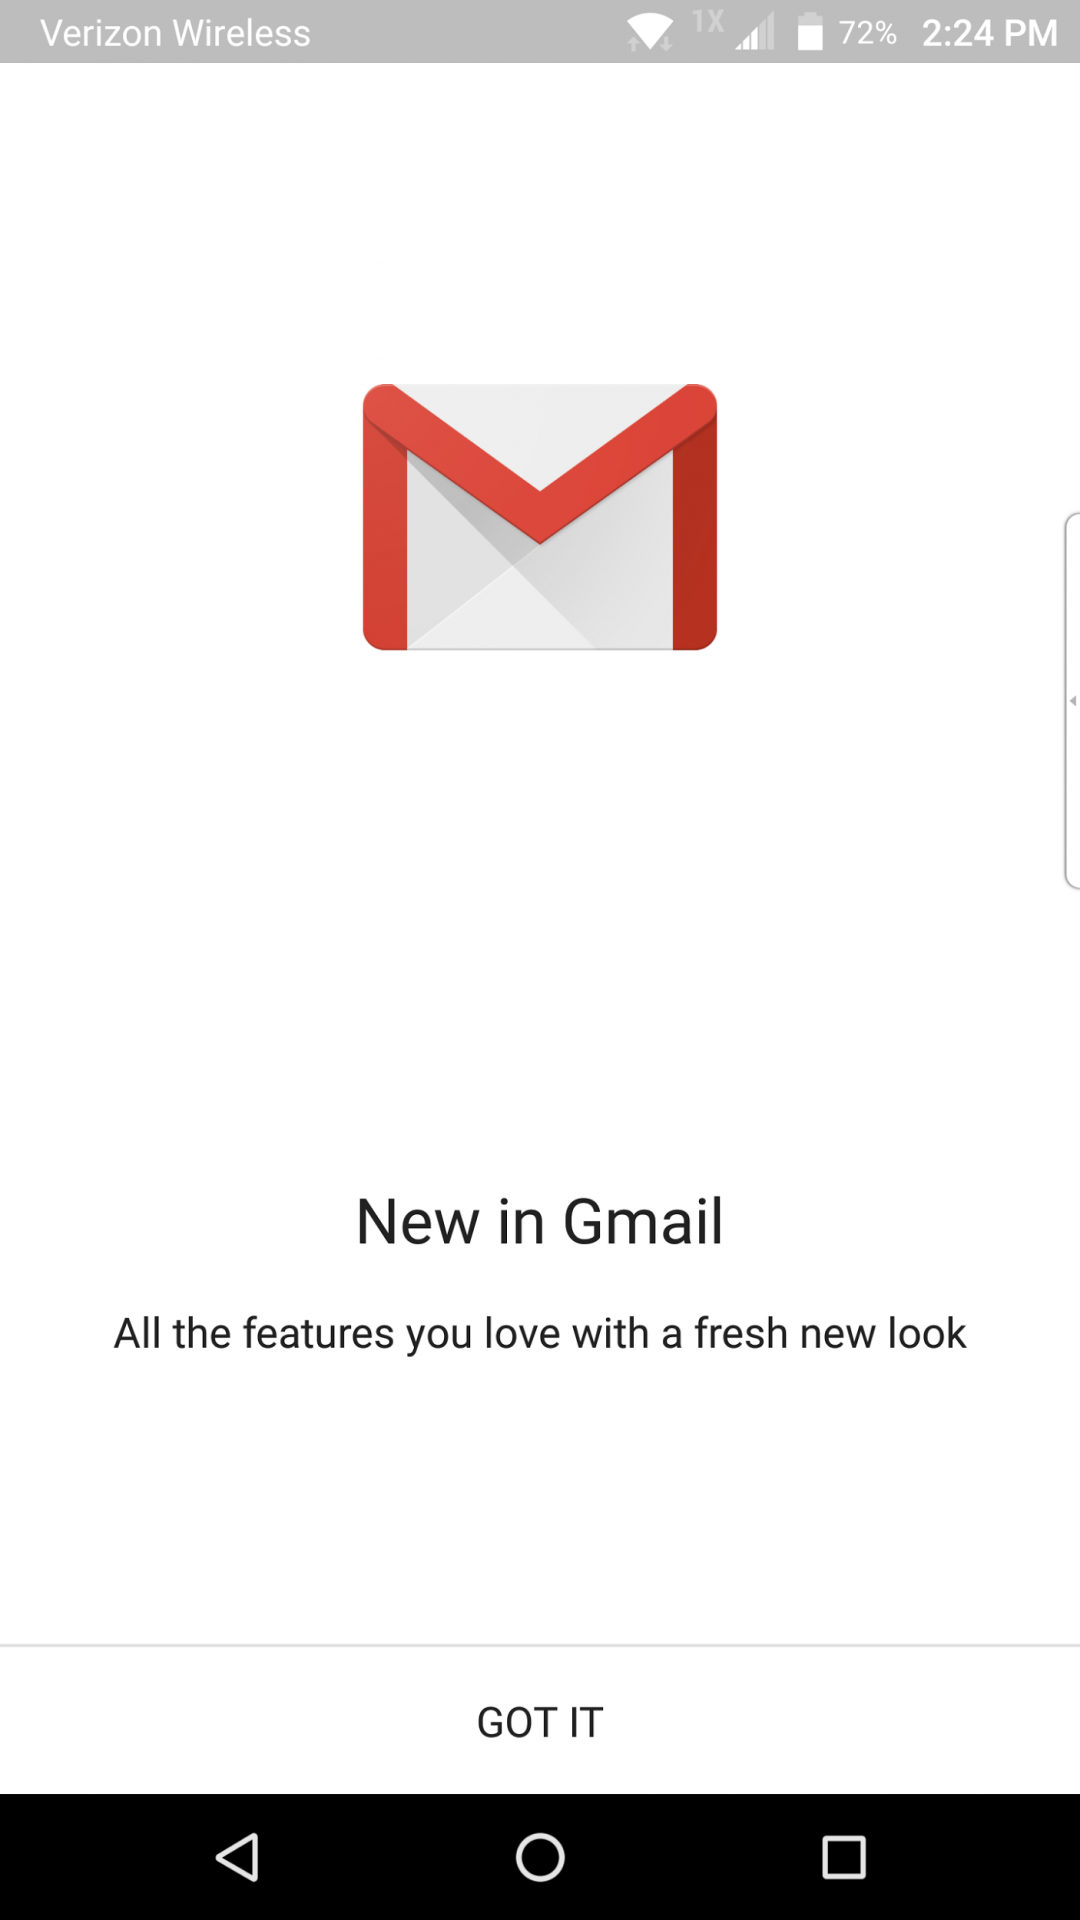 New in Gmail screen with Got It button